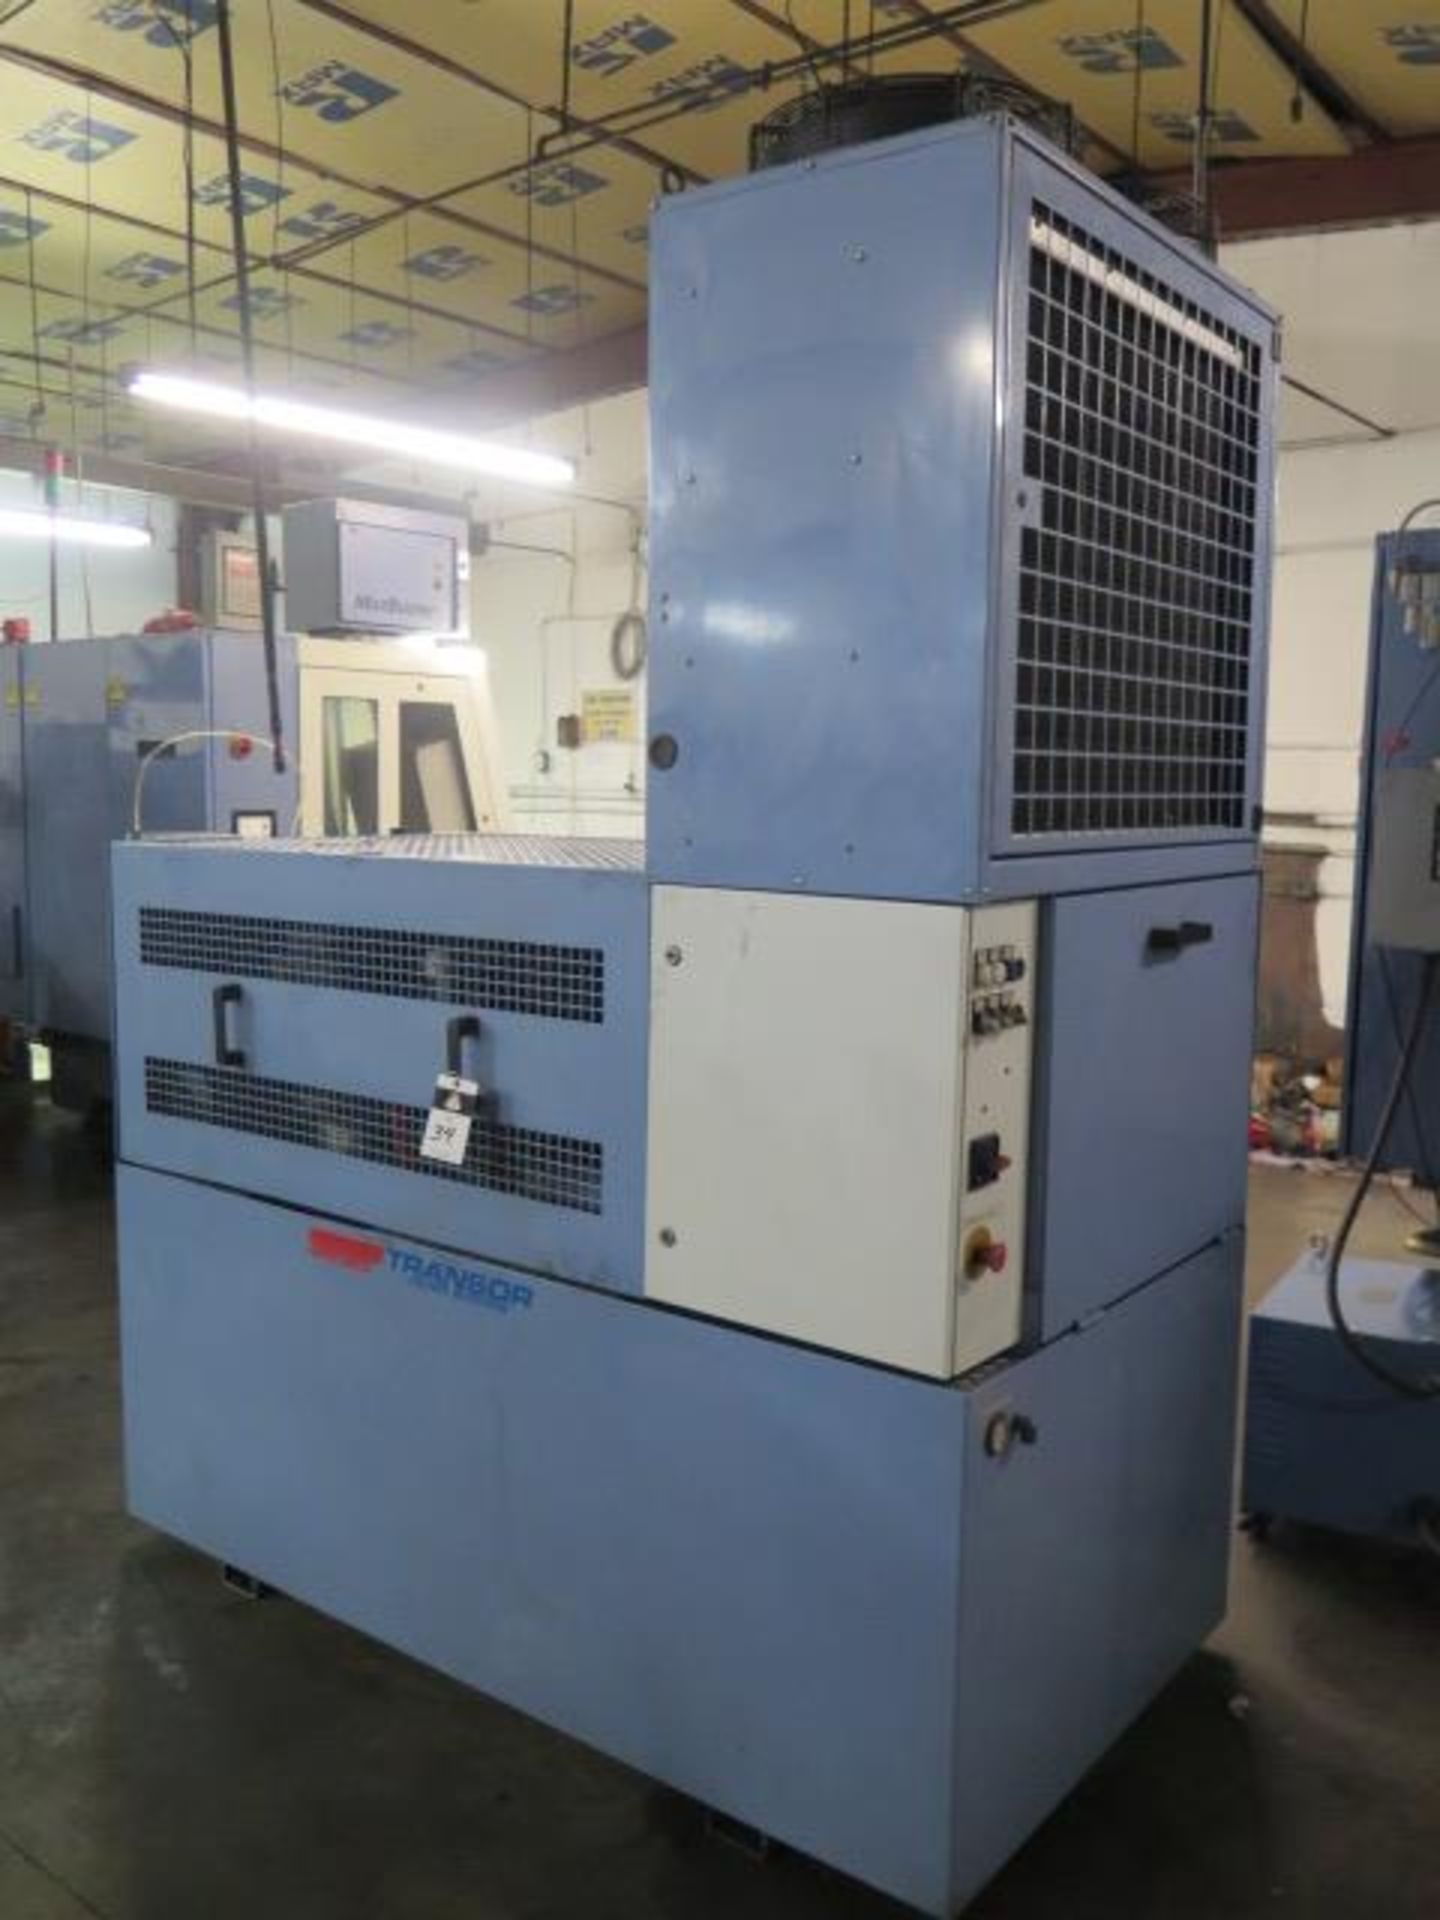 2006 Frigadon FWC-110-TRP Transor Filter System s/n 06230971 (Refrigeration and Micron) SOLD AS IS